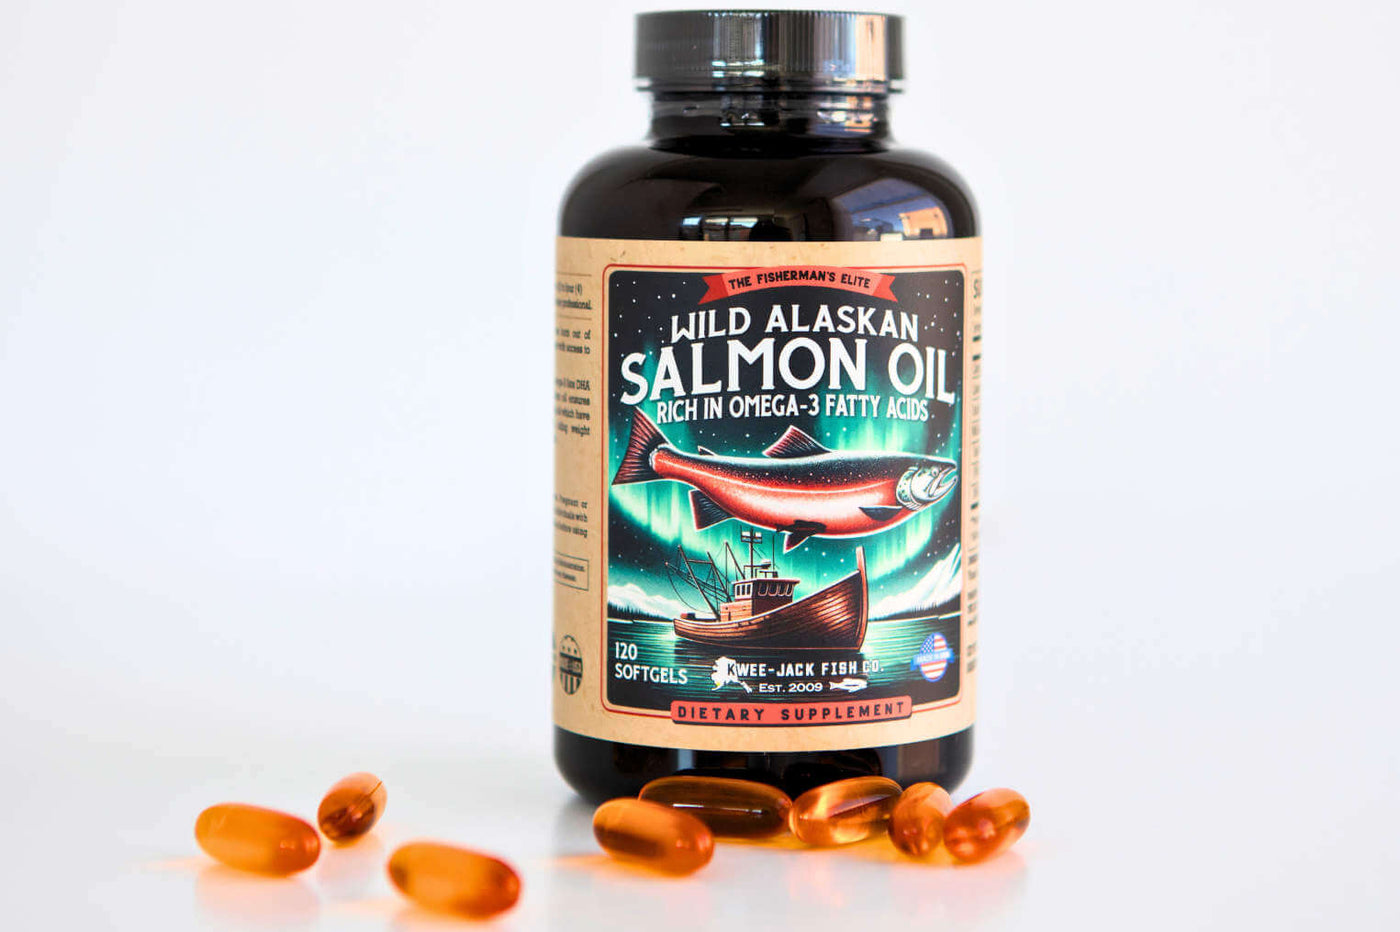 Kwee-Jack Fish Co. Wild Alaskan Salmon Oil Supplement with capsules displayed.